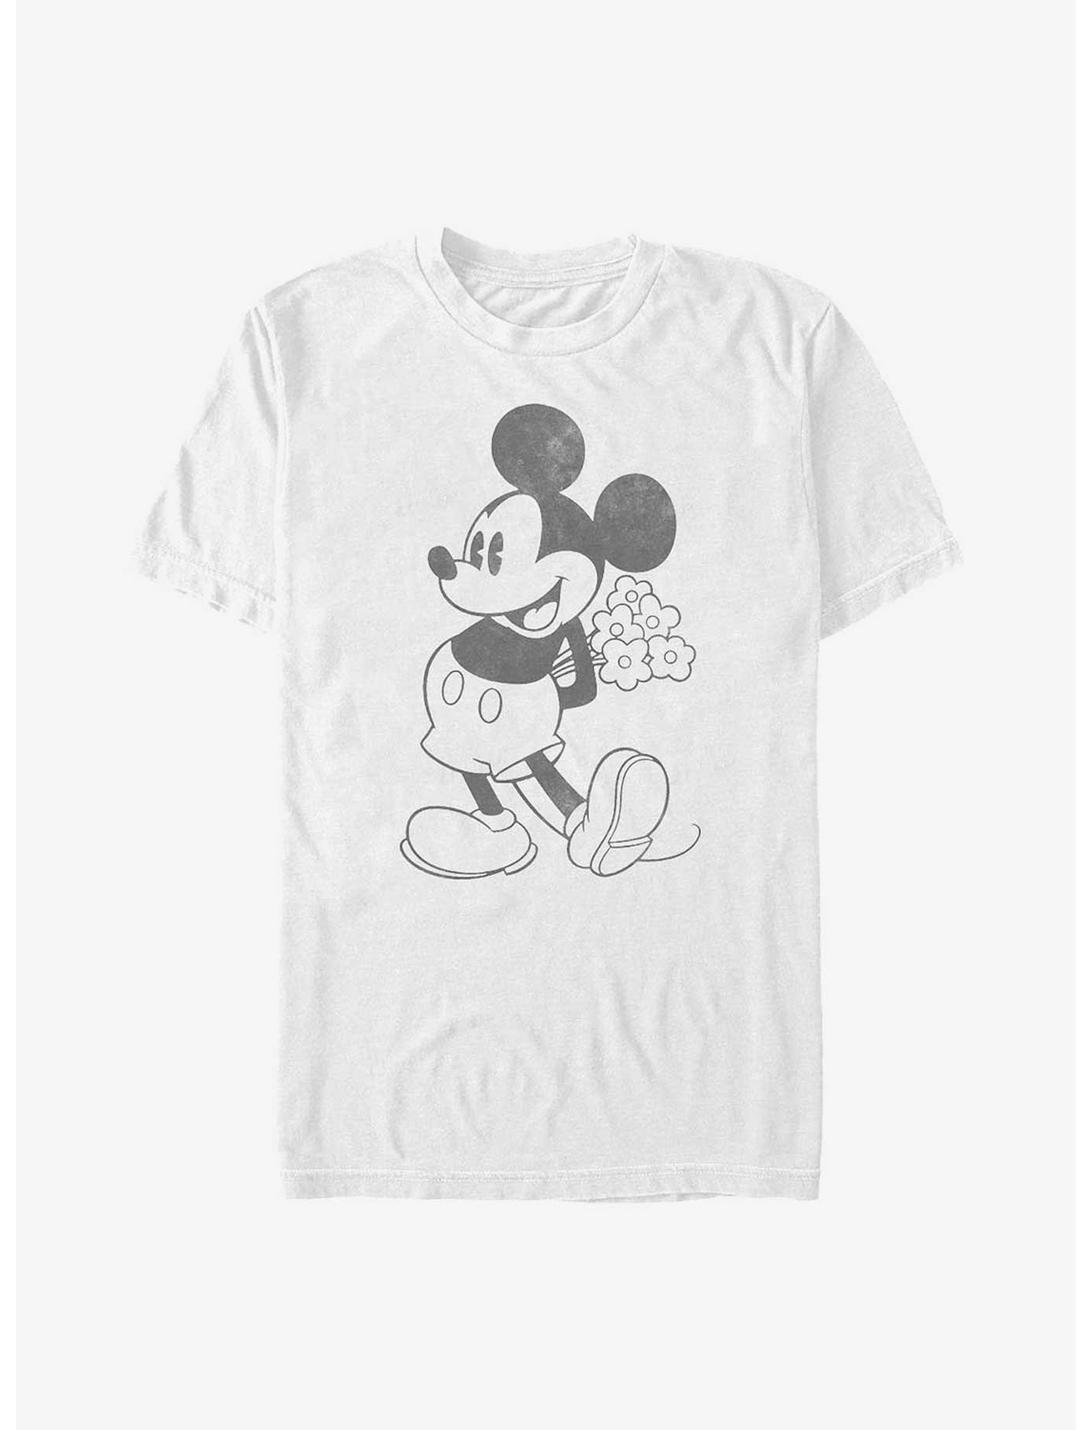 Disney Mickey Mouse Mickey Black And White T-Shirt, WHITE, hi-res